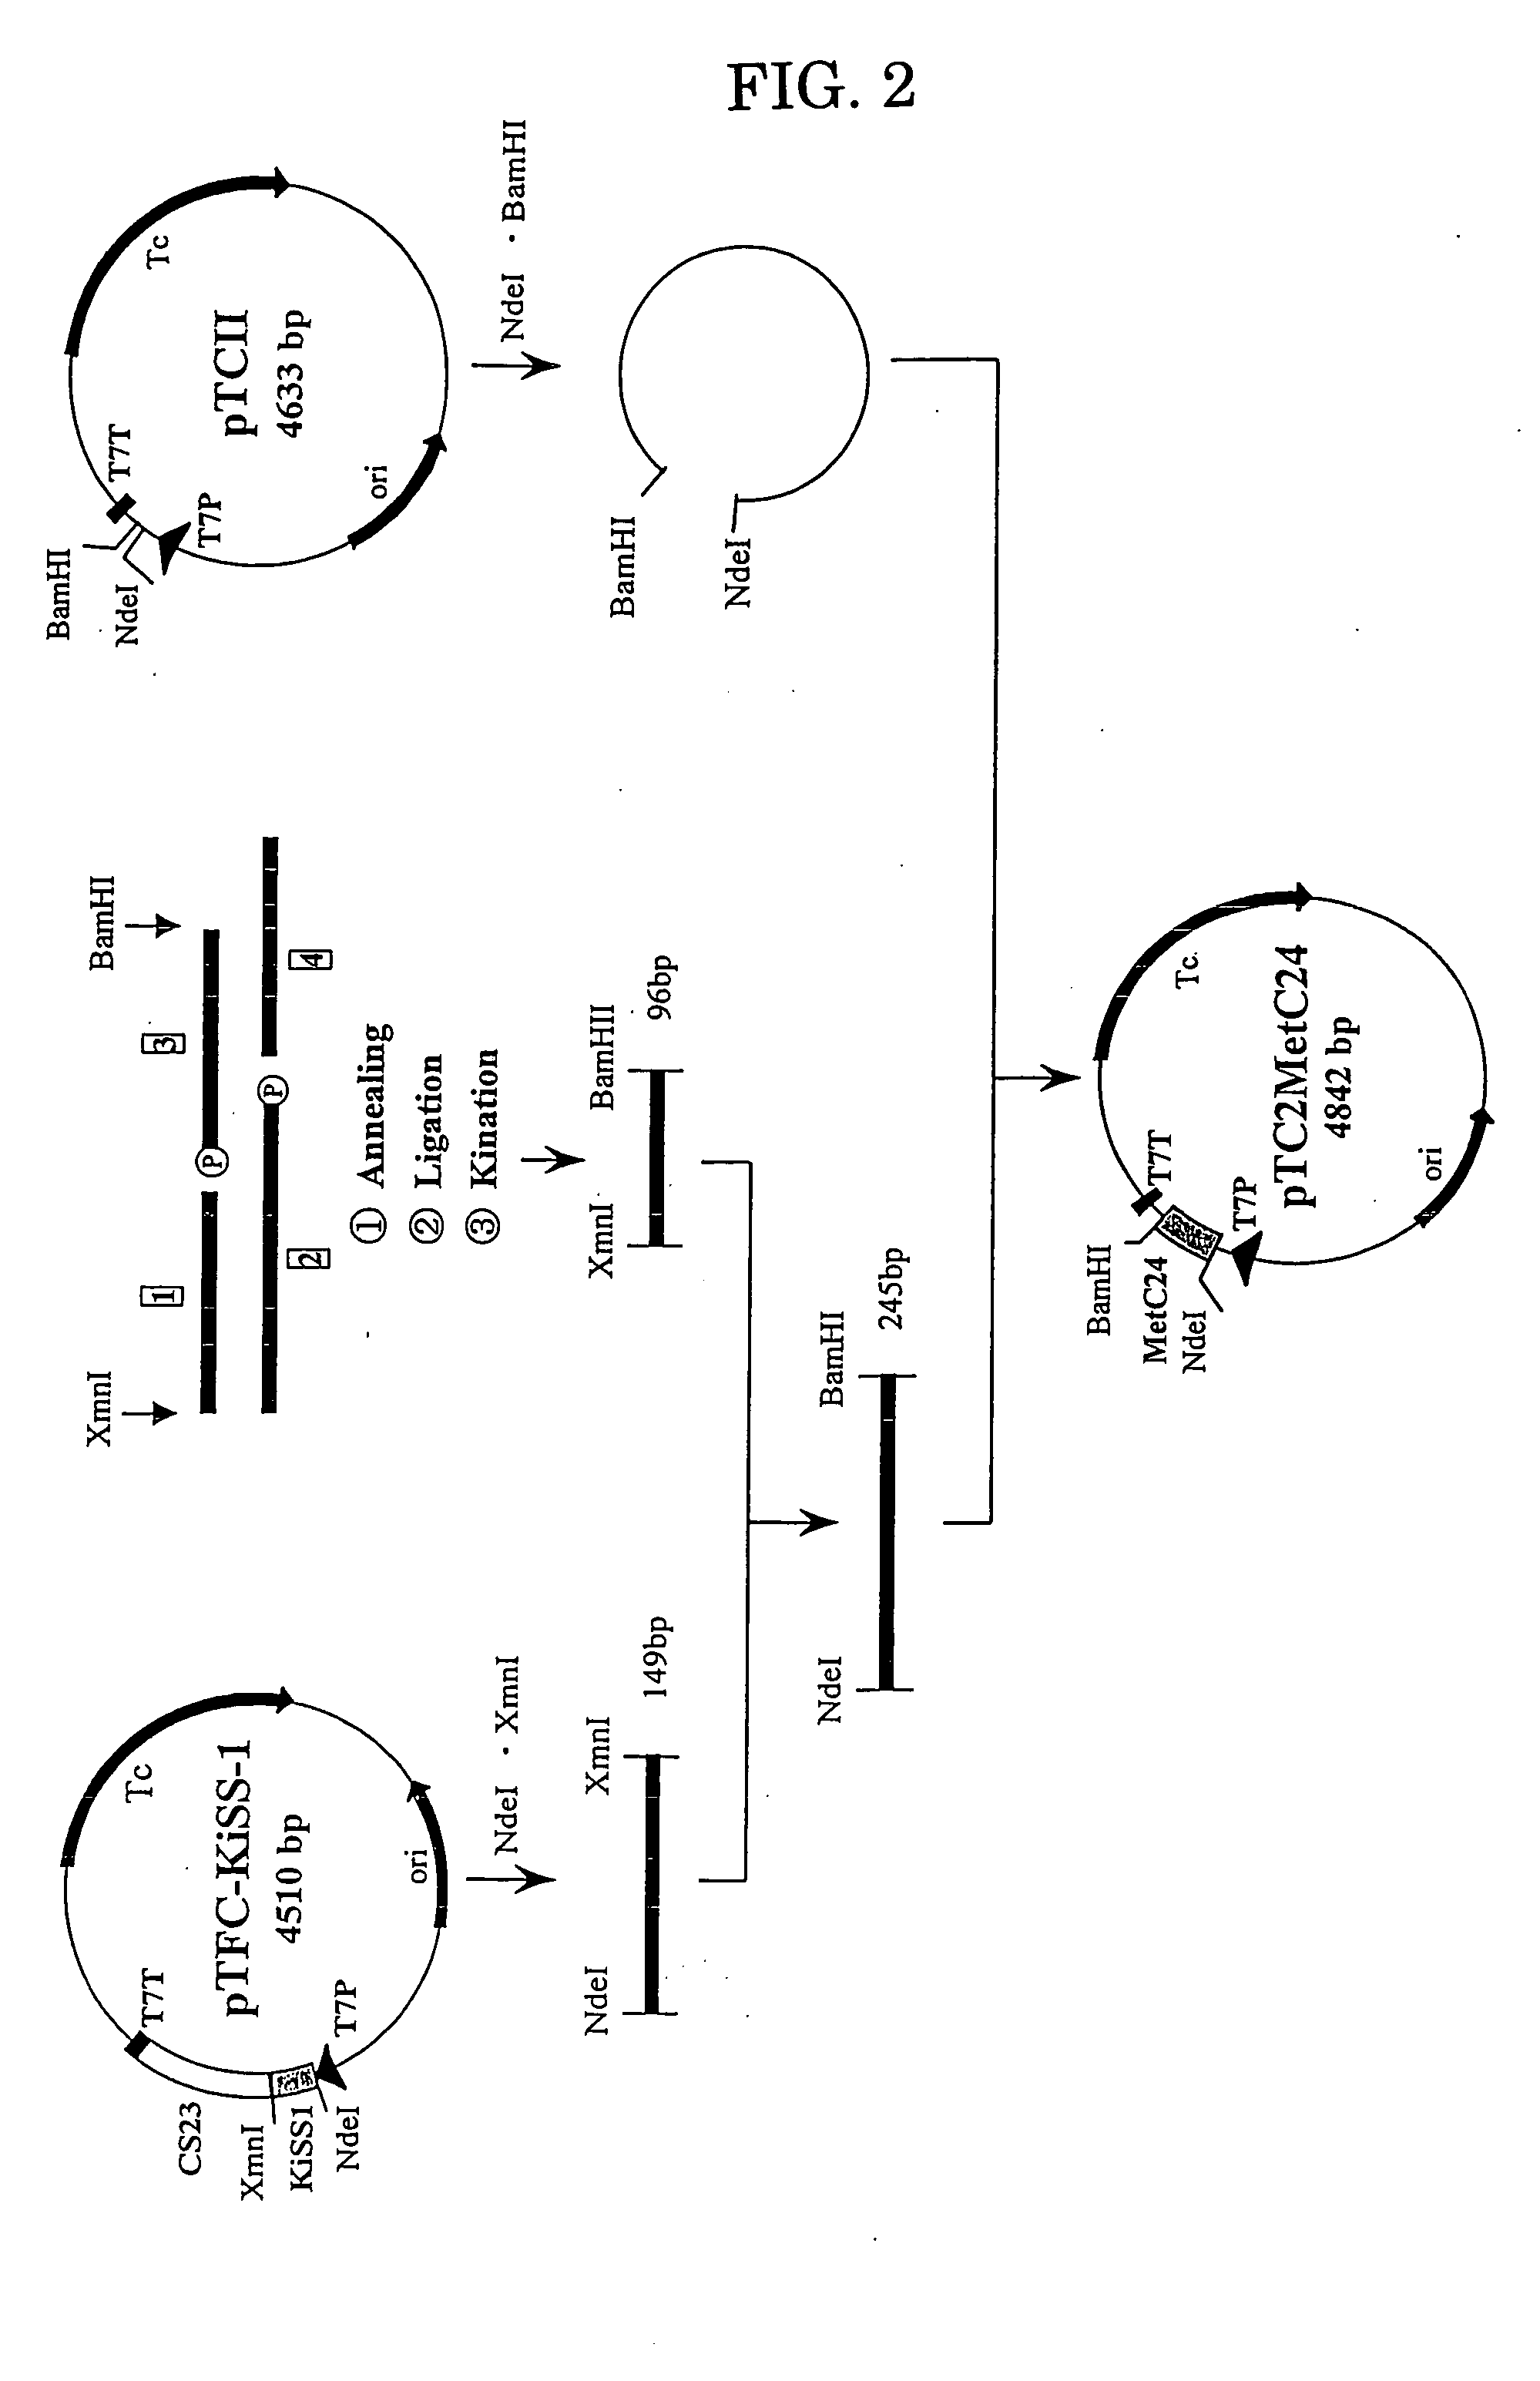 Process for producing kiss-1 peptide